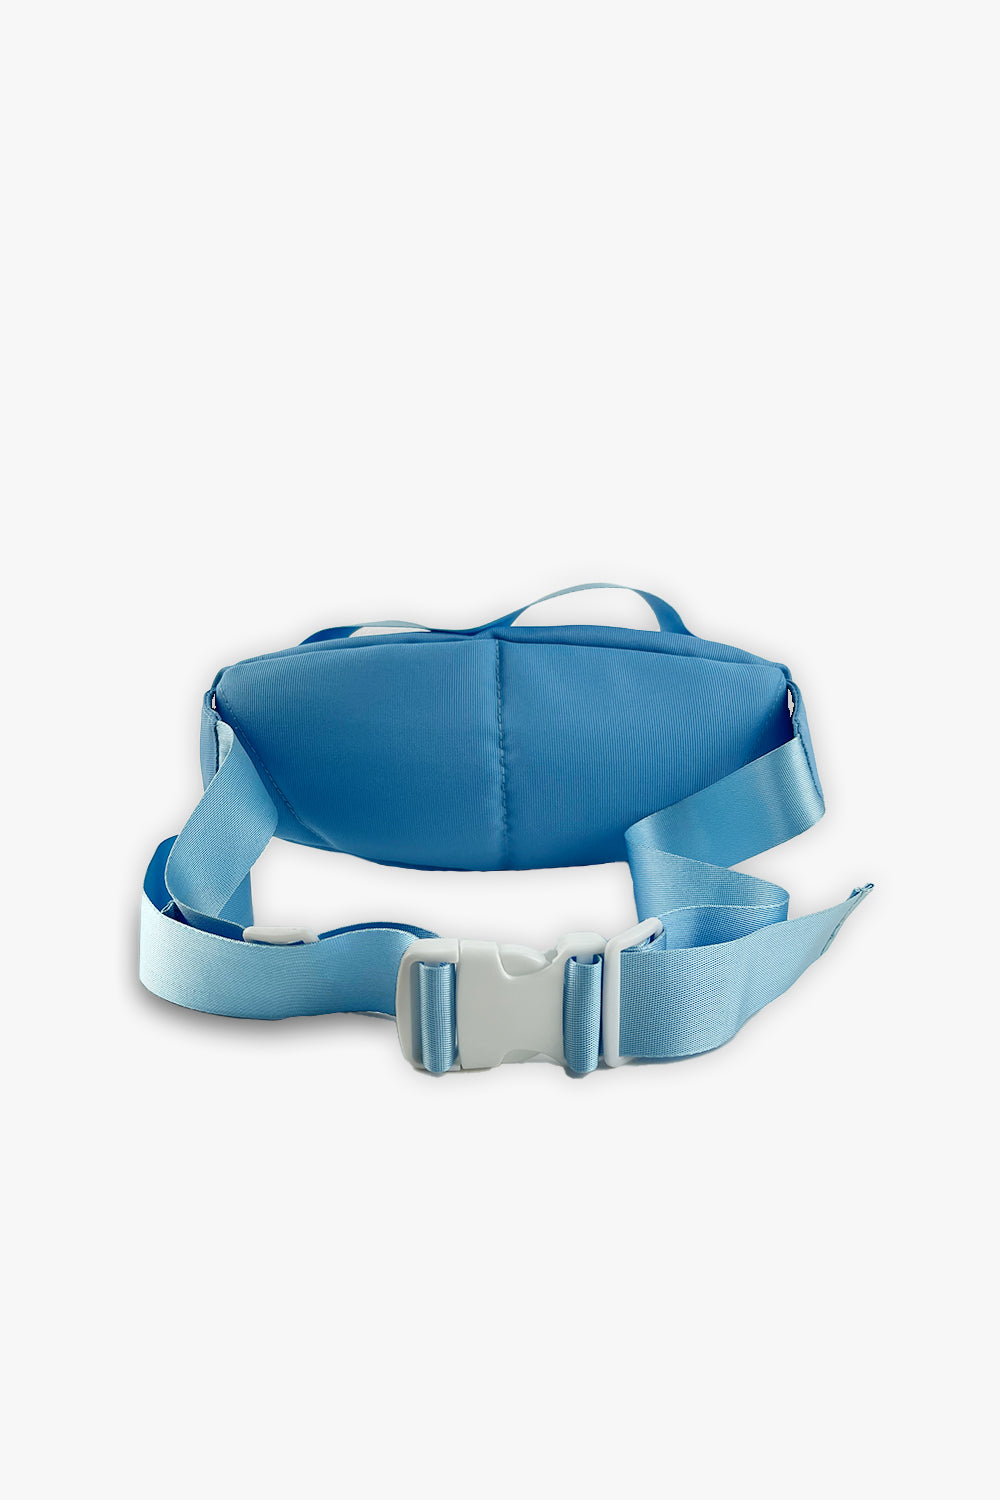 blue fanny pack back view